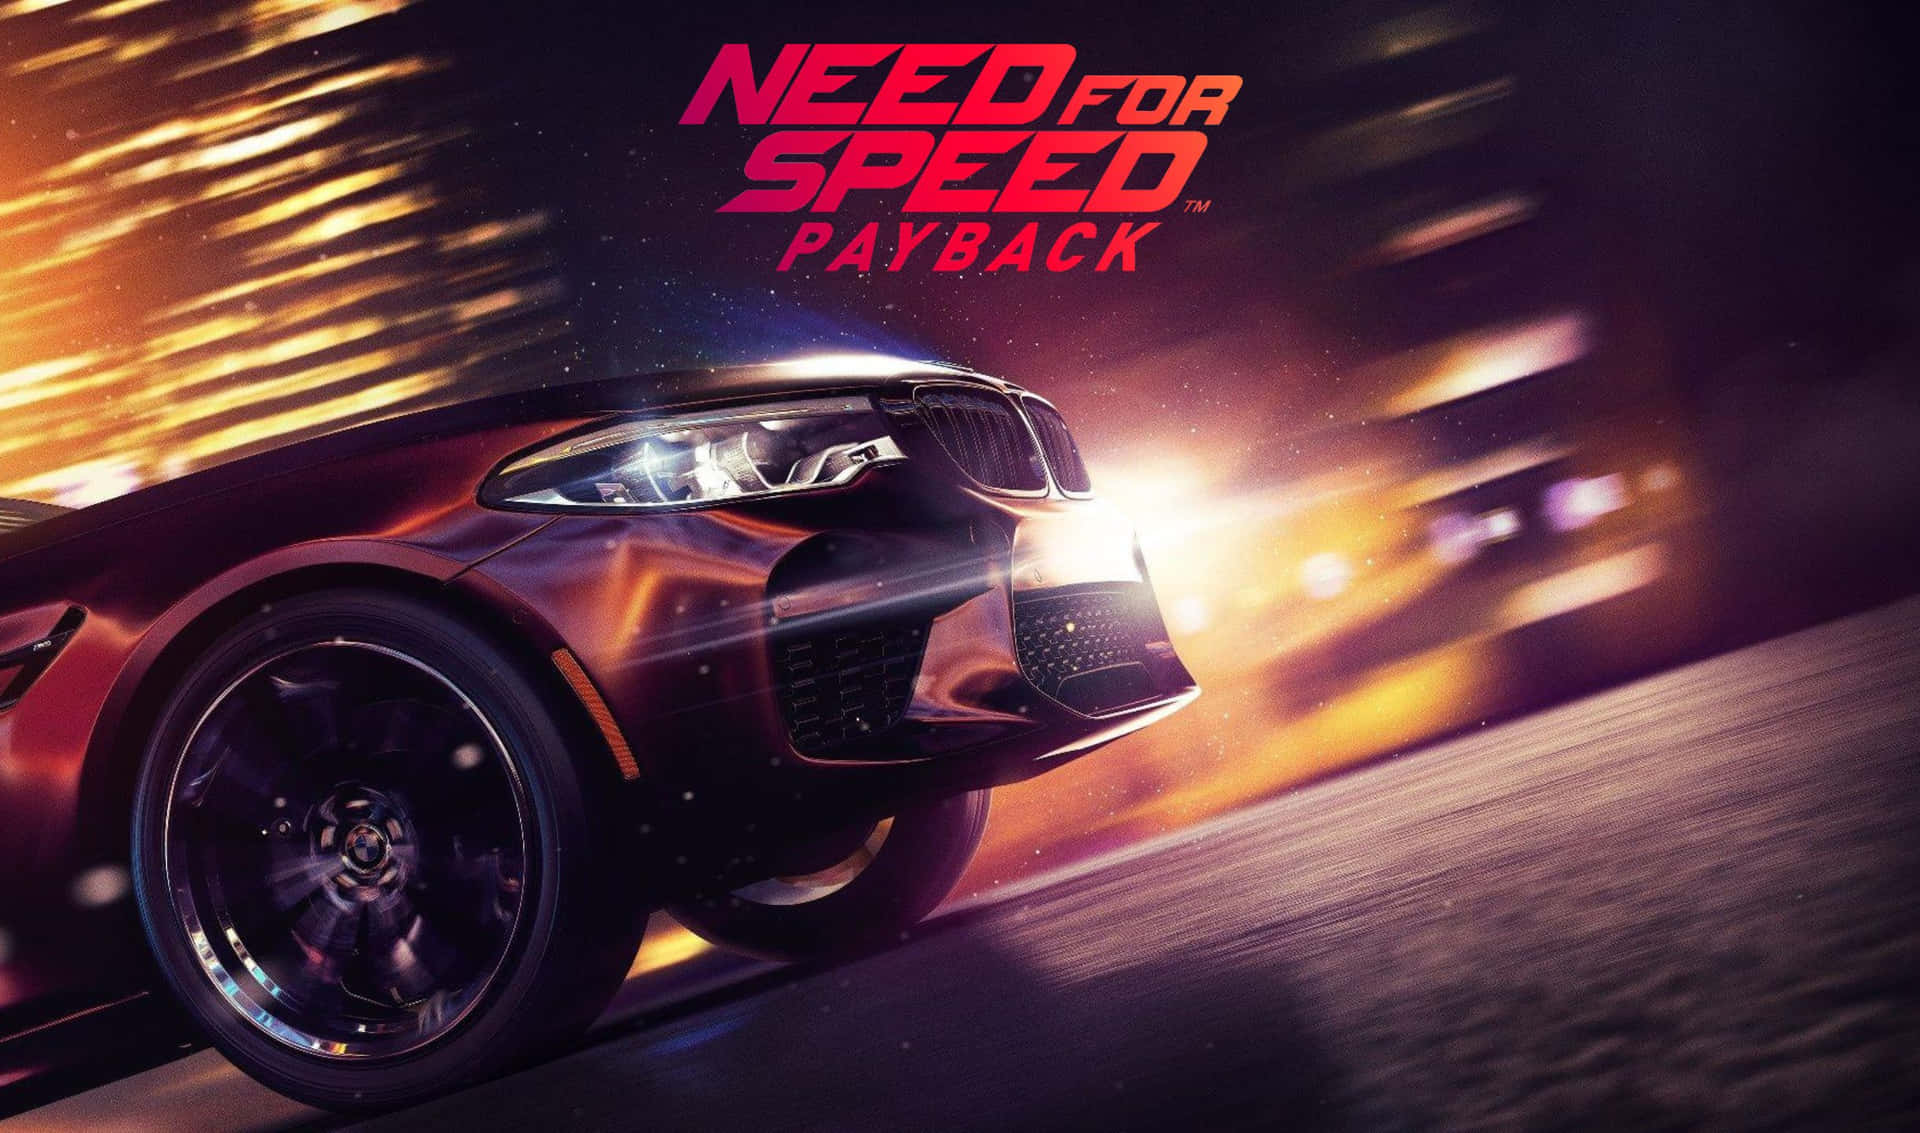 "Race to the finish line in Need for Speed Payback."